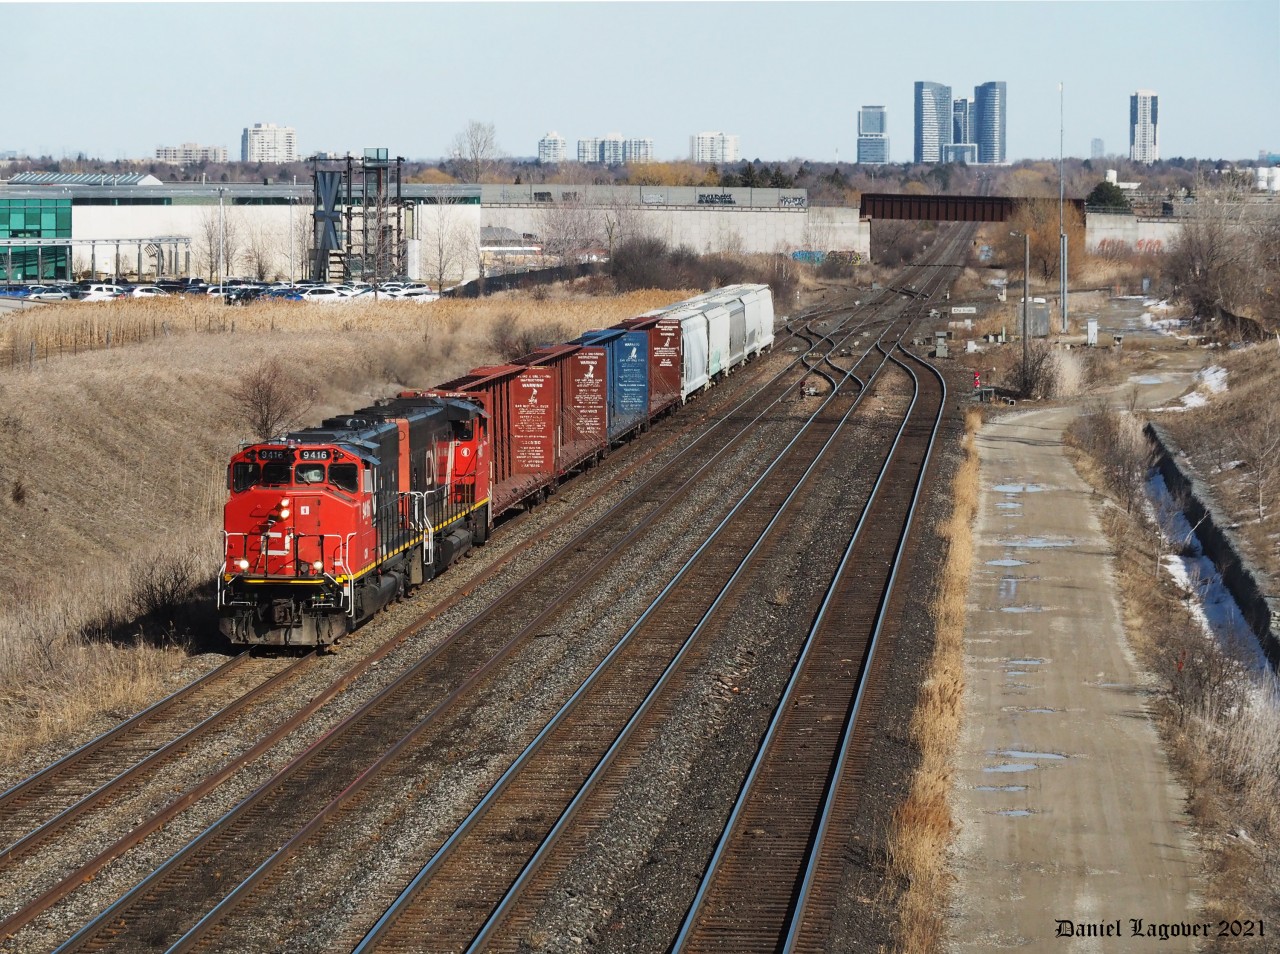 CN local 545 enroute to the MacMillan yard after coming off the Newmarket Subdivision which overpasses the CN York subdivision in the background.